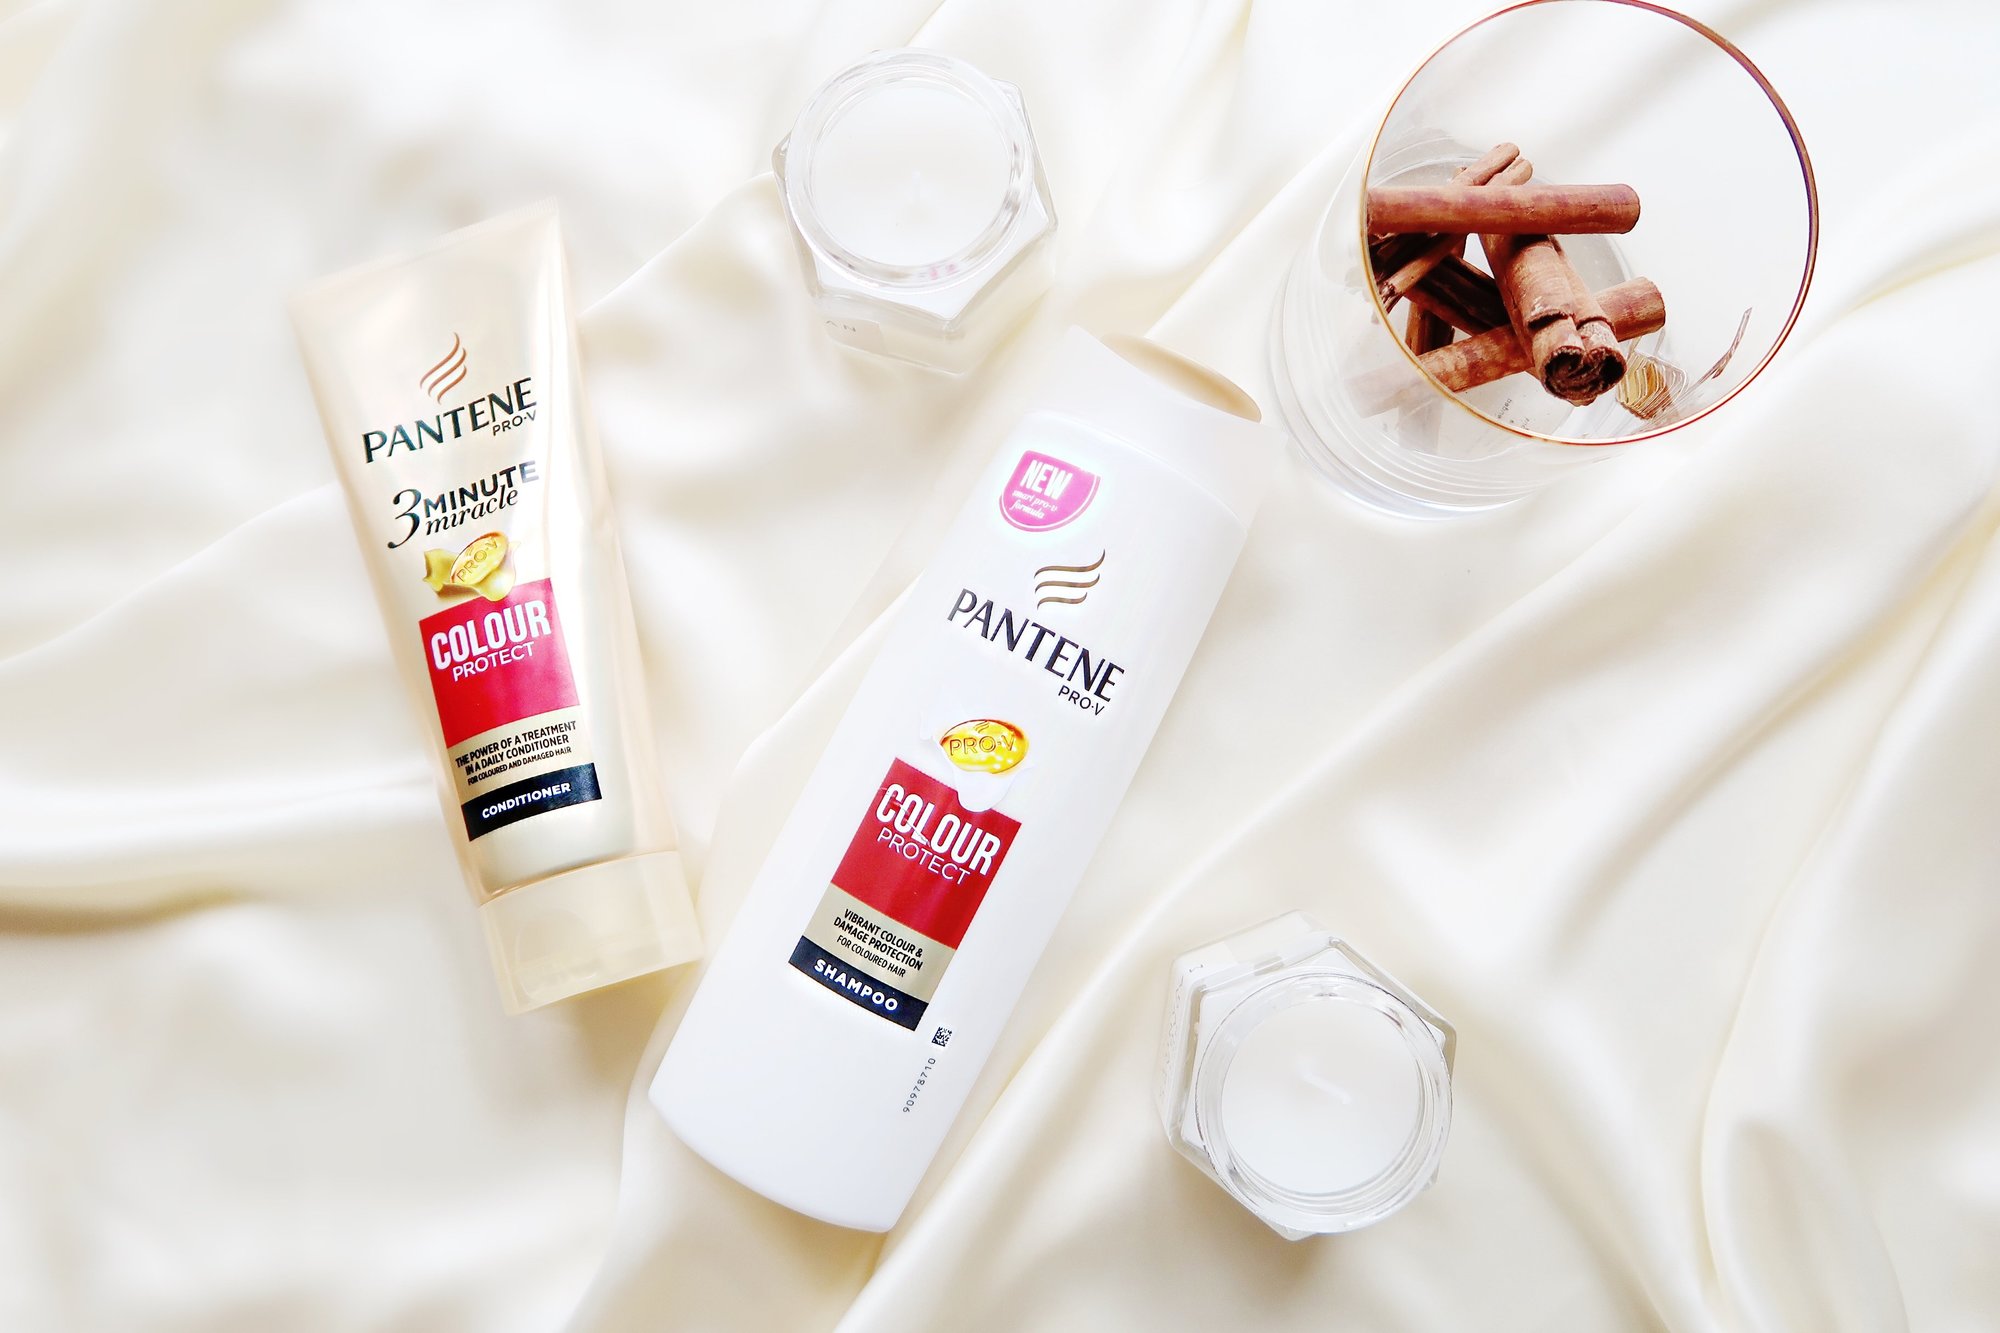 Close up of multiple Pantene haircare products